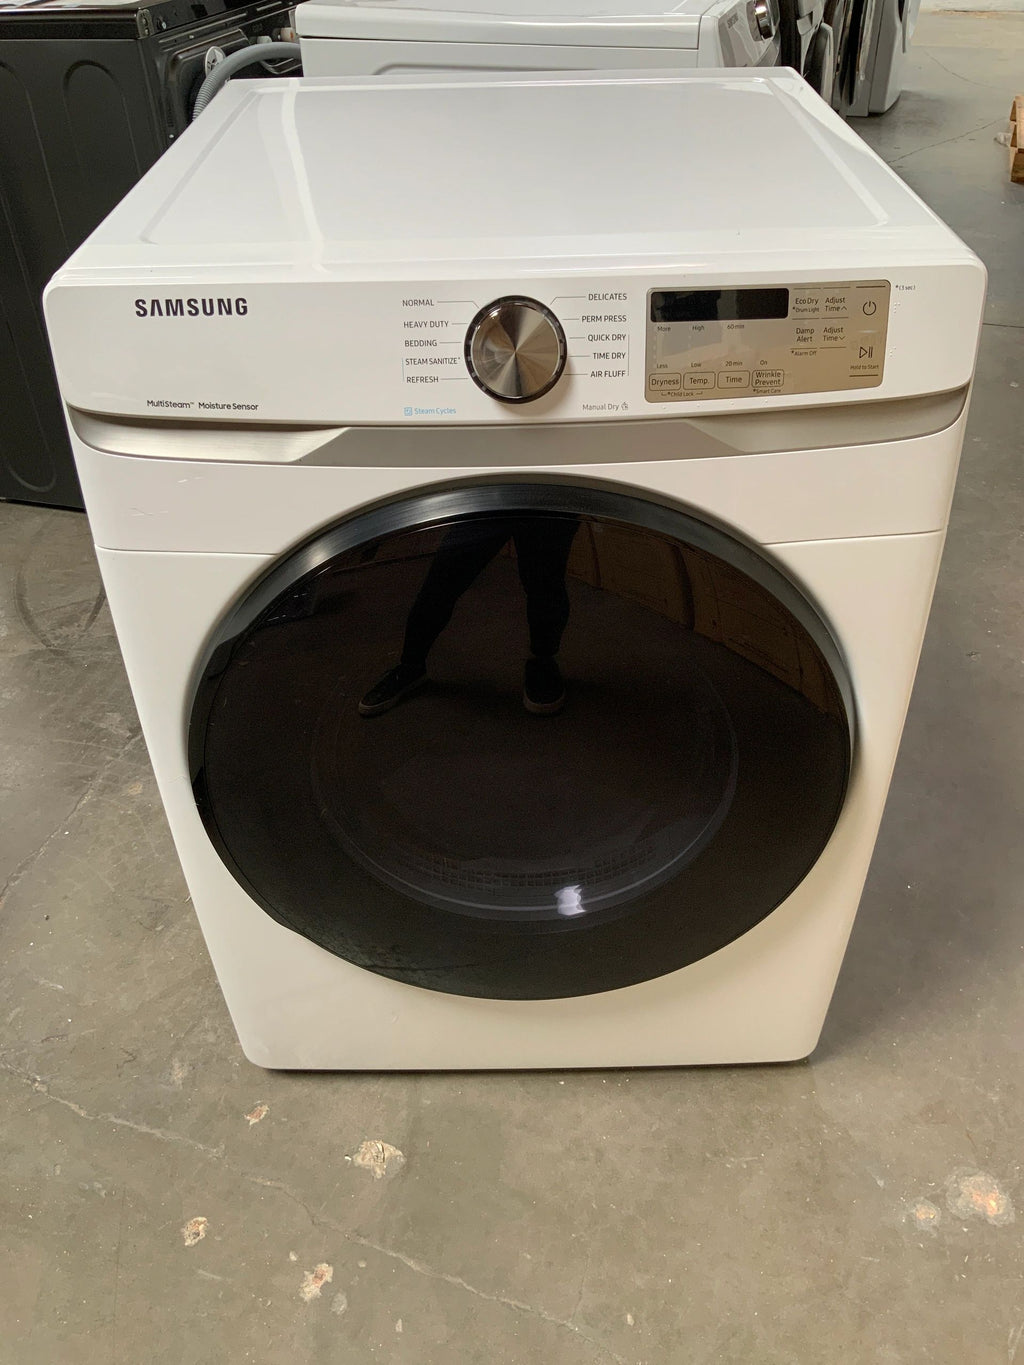 New Dent and Scratch. Samsung 7.5 cu. ft. White Gas Dryer with Steam. Model: DVG45R6100W